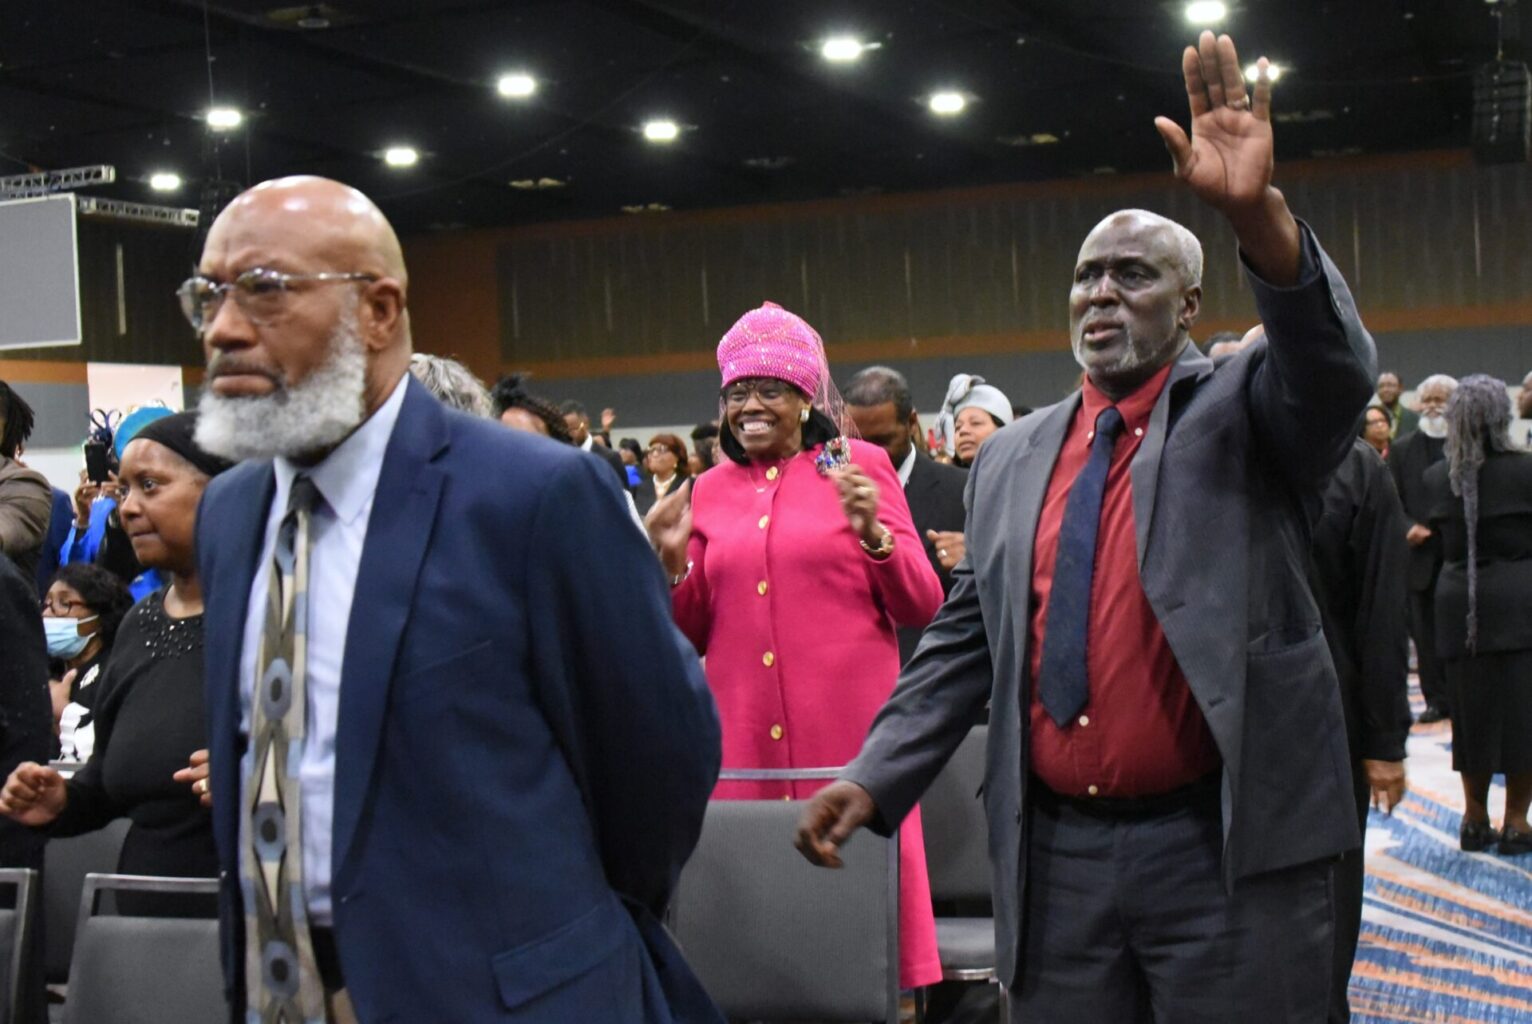 SLIDESHOW COGIC lifts up praise for 115th Holy Convocation